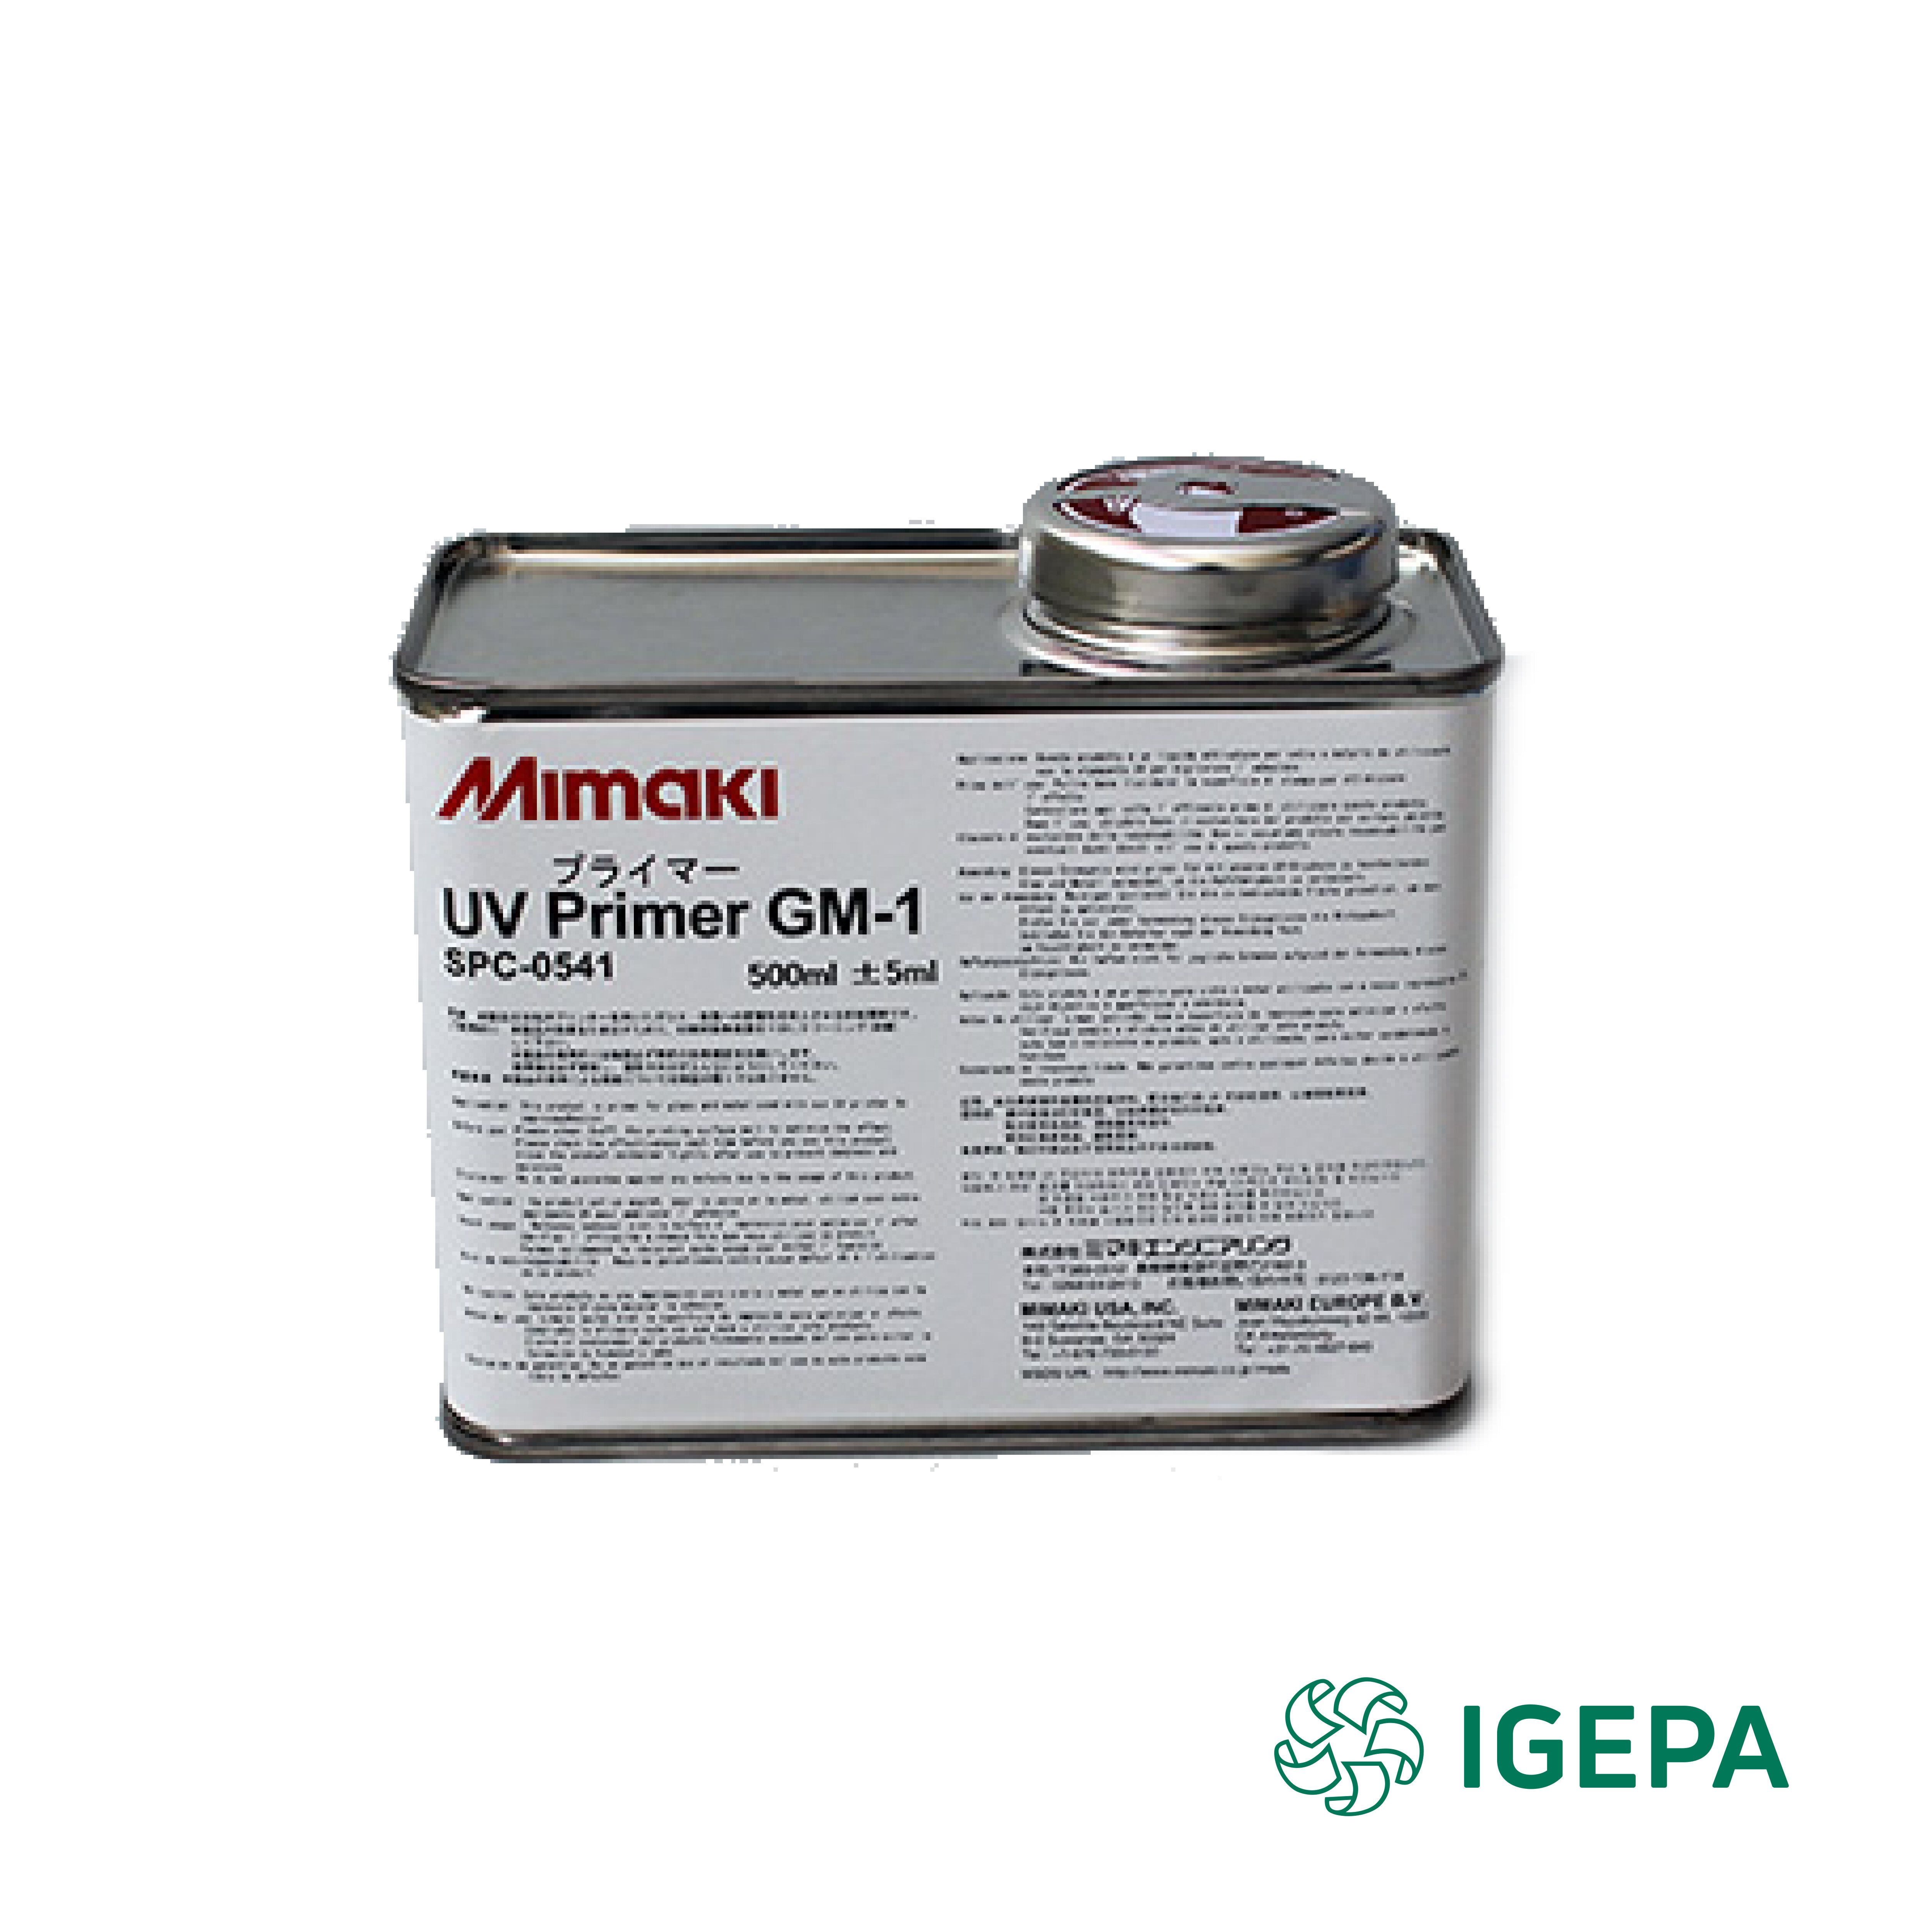 UV Primer GM-1 for manual use on metal and glass (500 ml can)